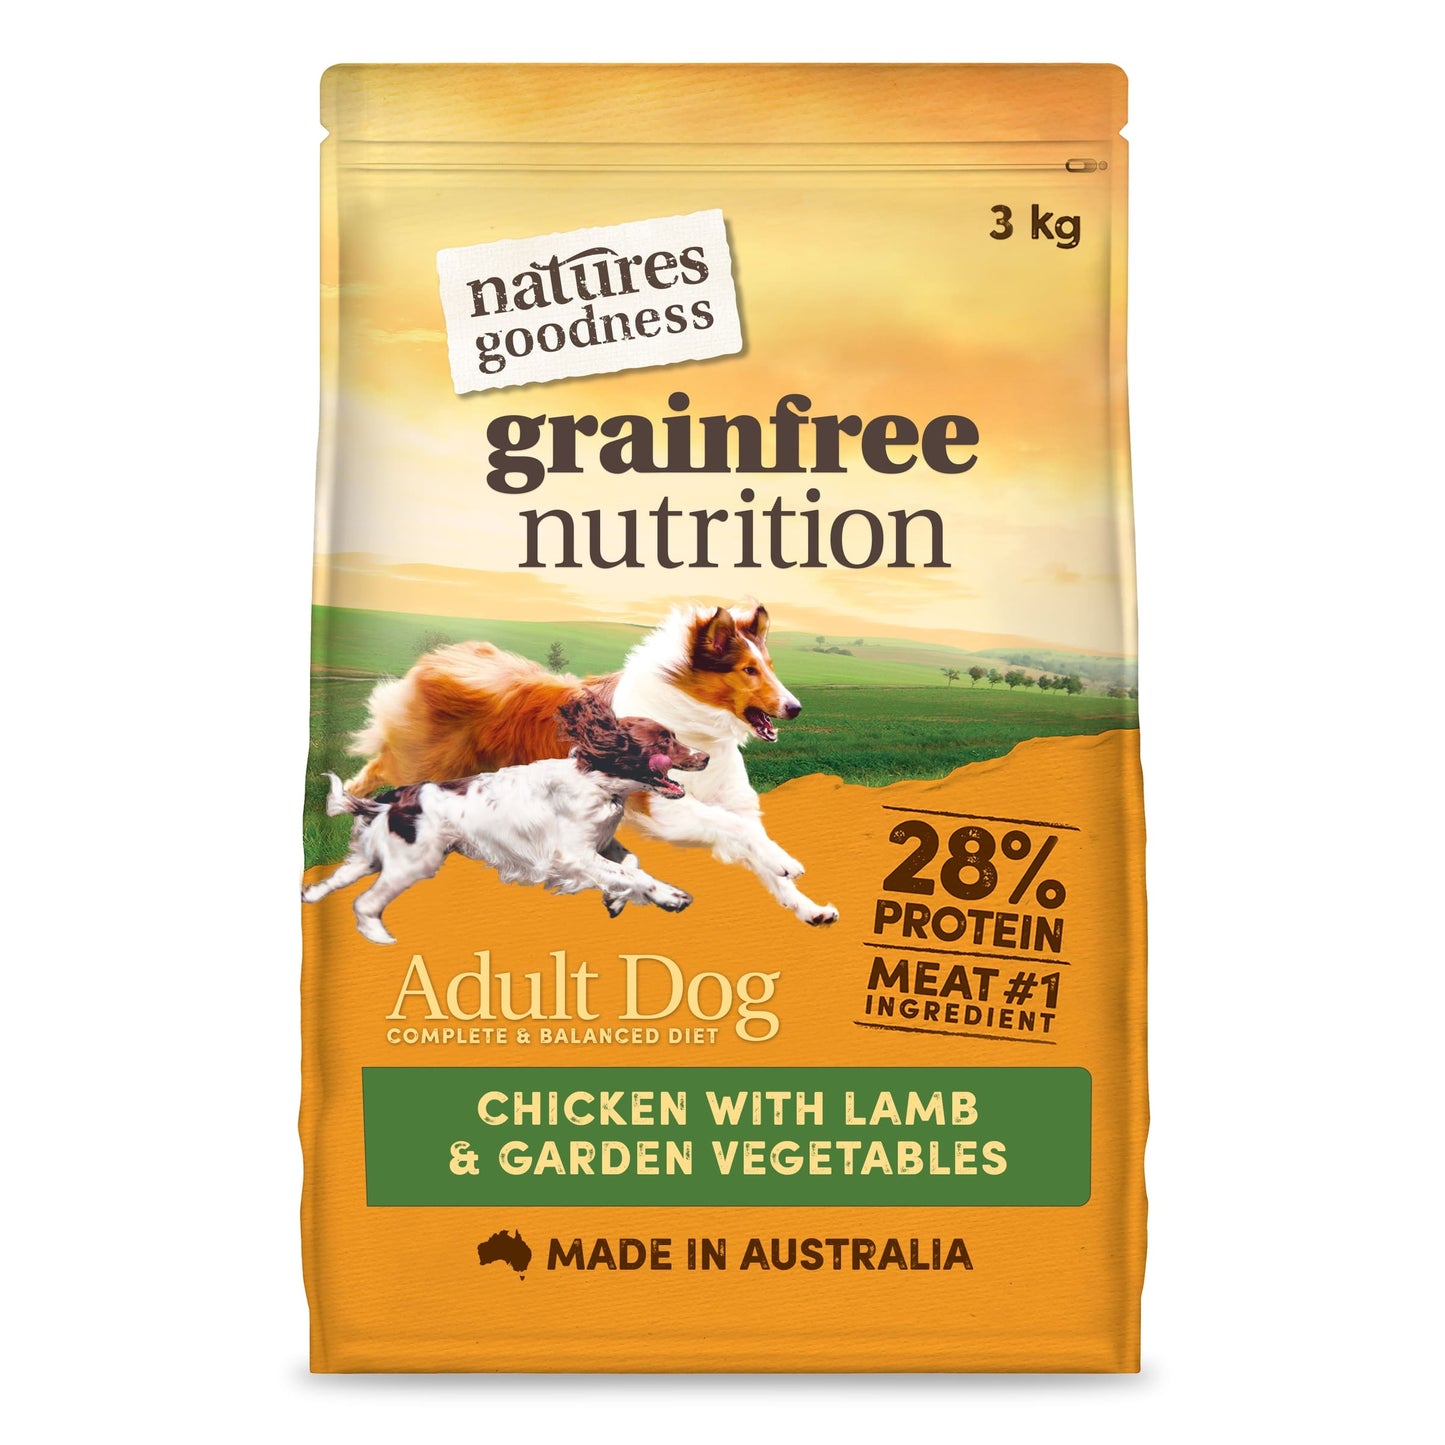 Natures Goodness Grain Free Chicken with Lamb and Vegetables 3kg x 4